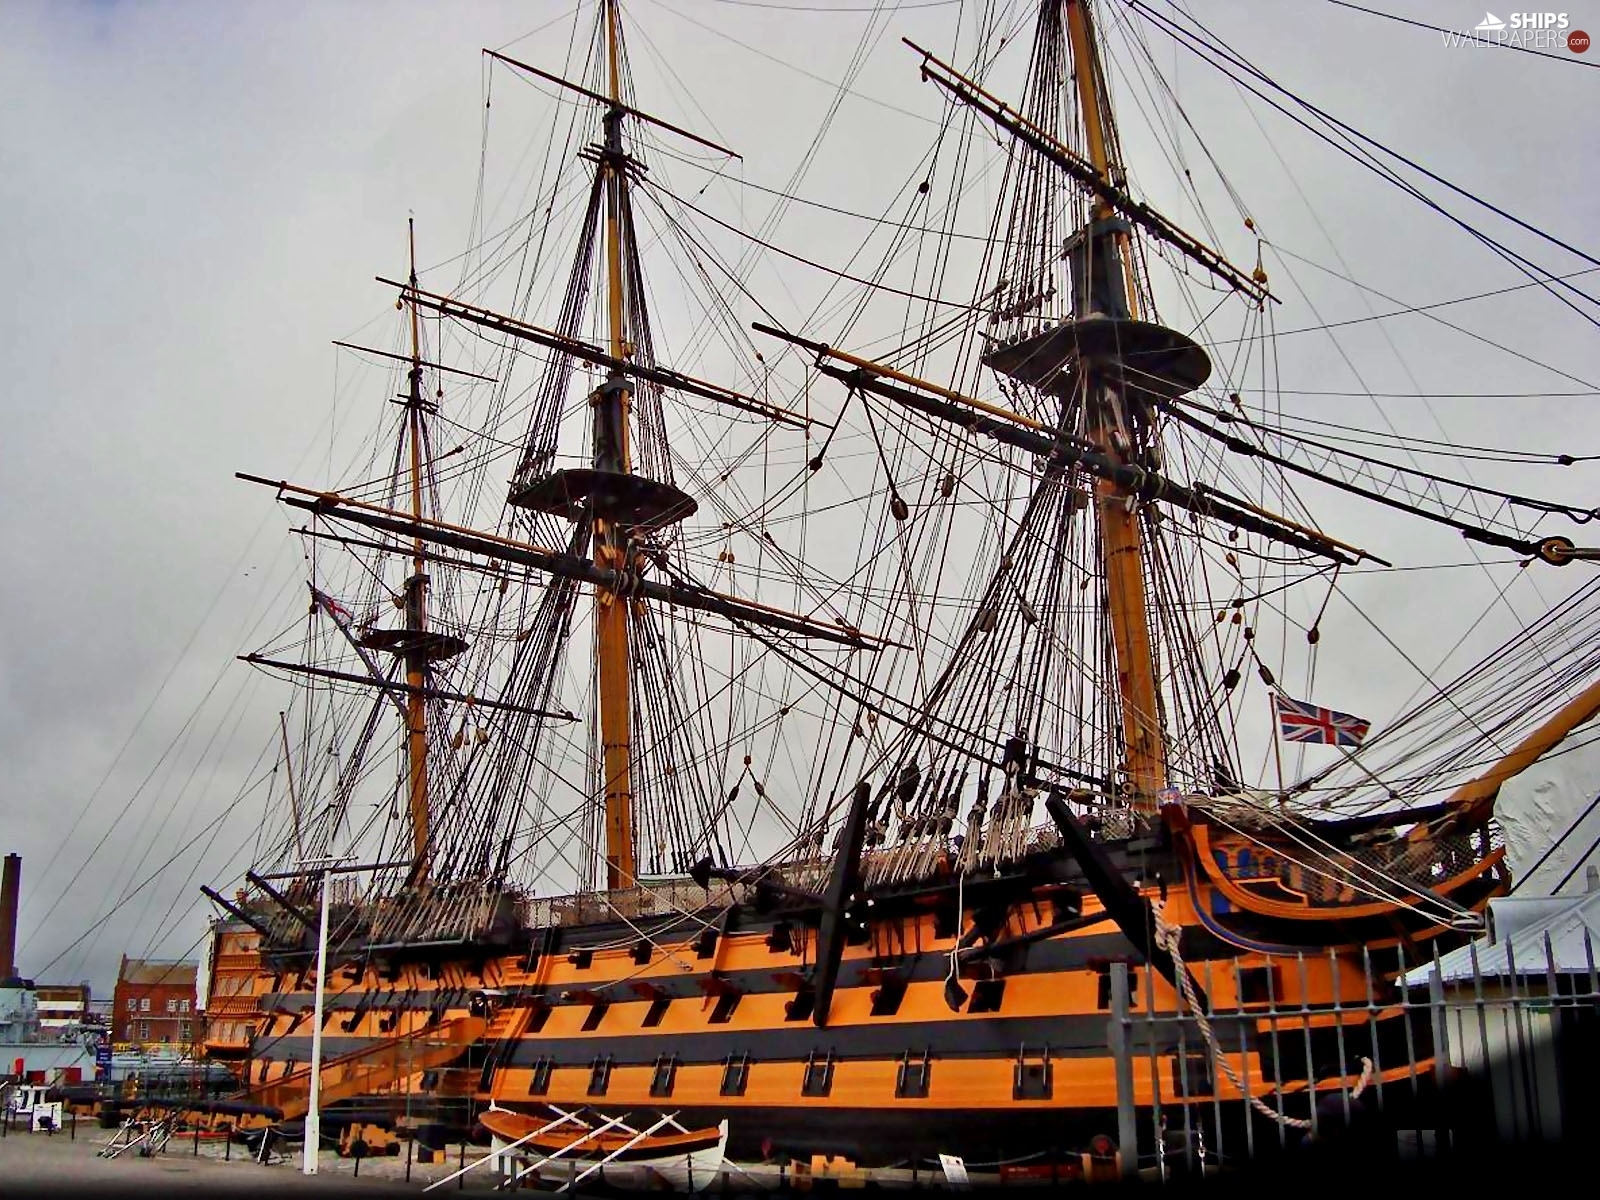 Hms Victory Wallpaper On